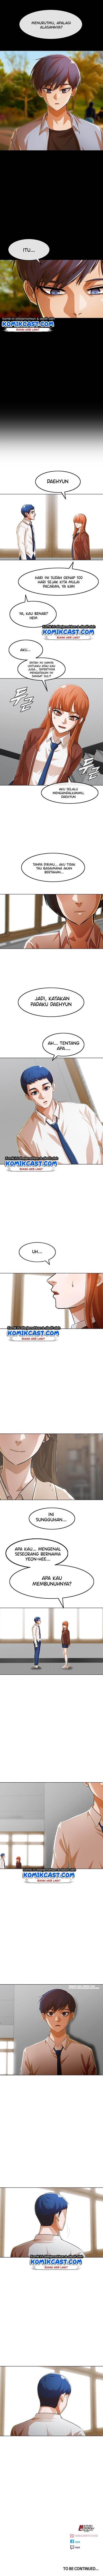 The Girl from Random Chatting! Chapter 143